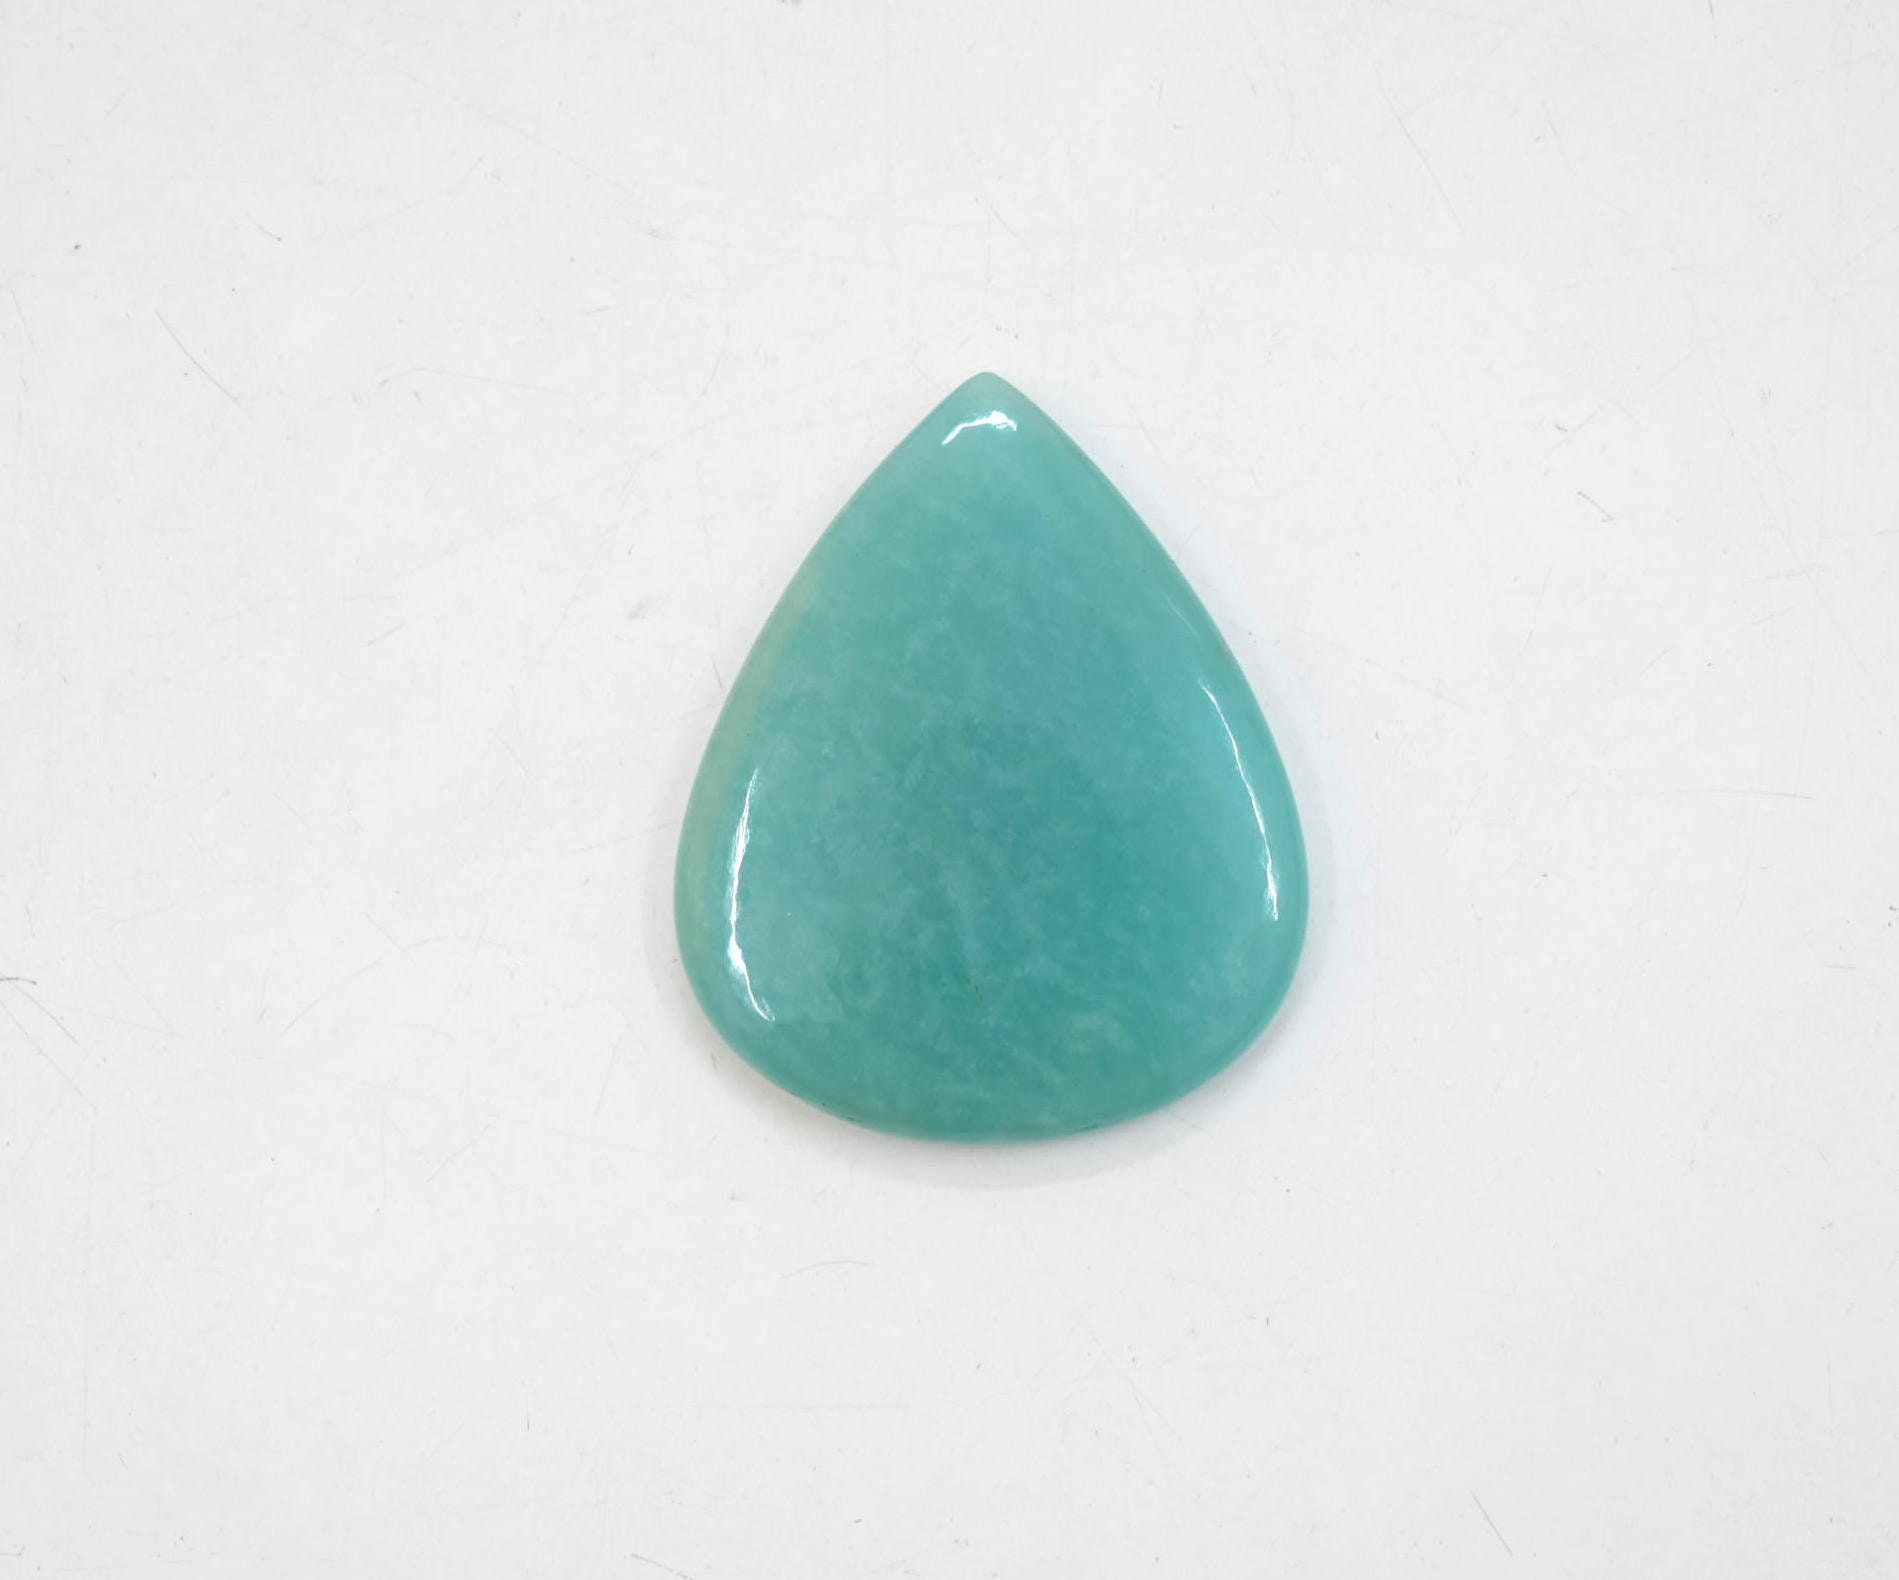 100% Natural African Amazonite Cabochon,Green Amazonite,Handmade Plain Cabochon,Handmade Faceted Cabochon,Natural Color Amazonite | Save 33% - Rajasthan Living 15